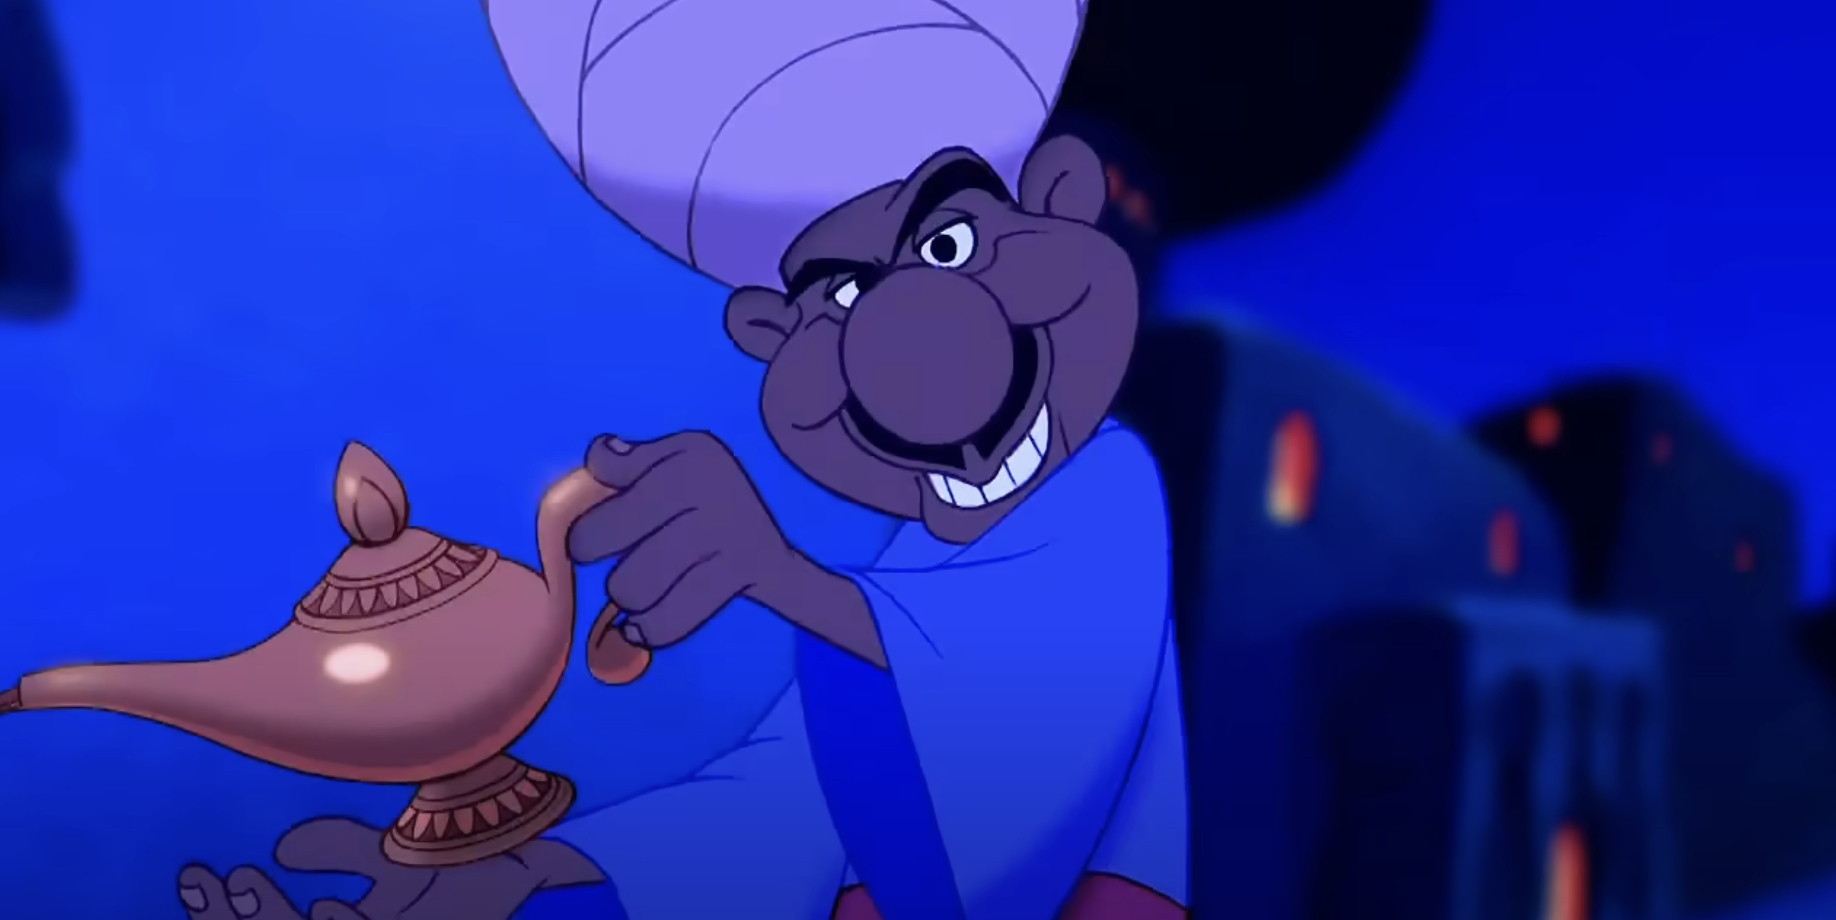 Mercent from Aladdin grinning as he holds the magic lamp